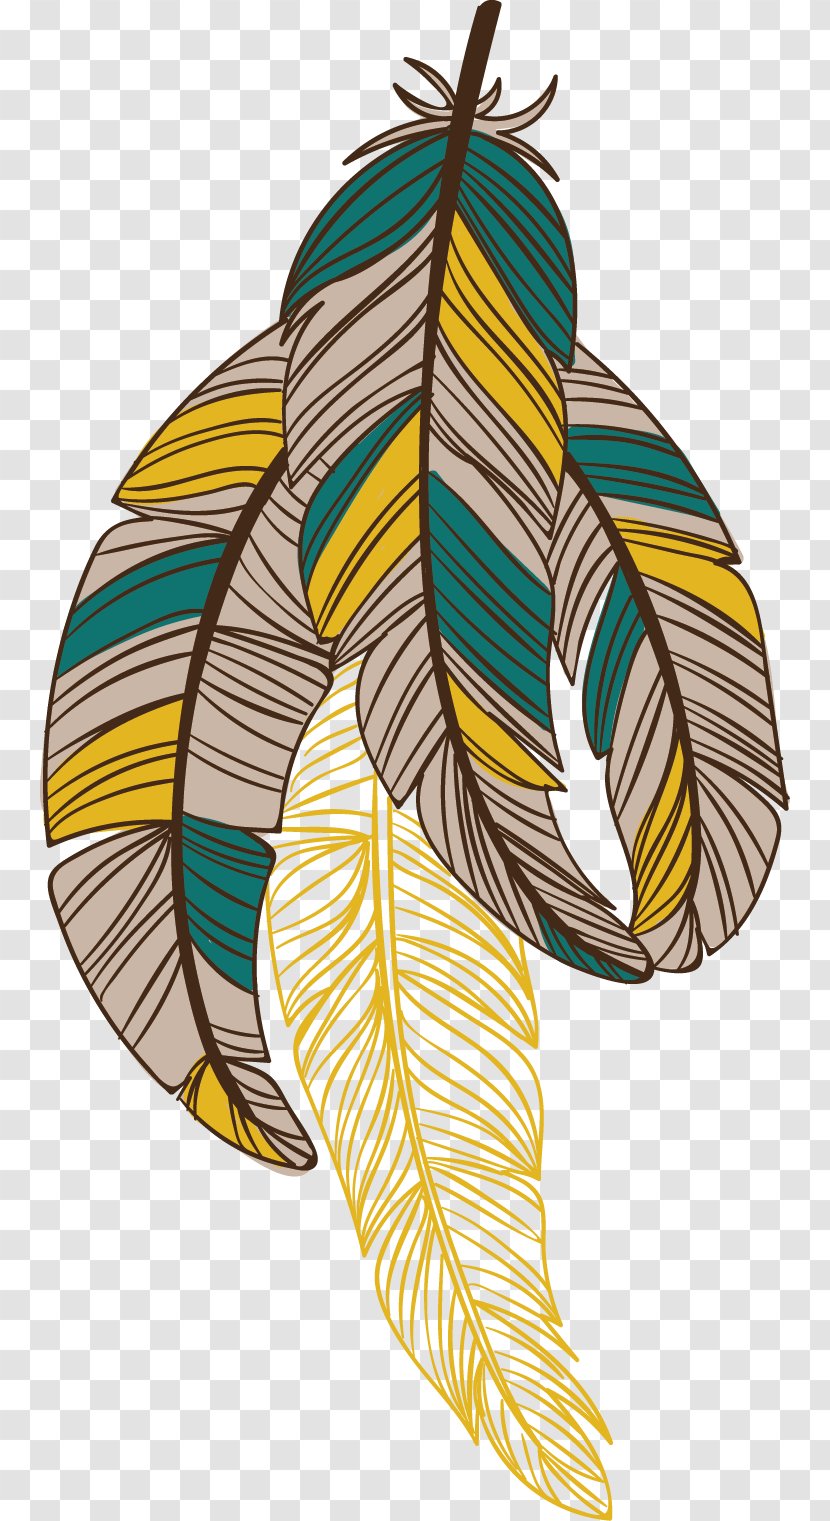 Feather Bird Euclidean Vector Drawing - Pollinator - Painted Feathers Transparent PNG